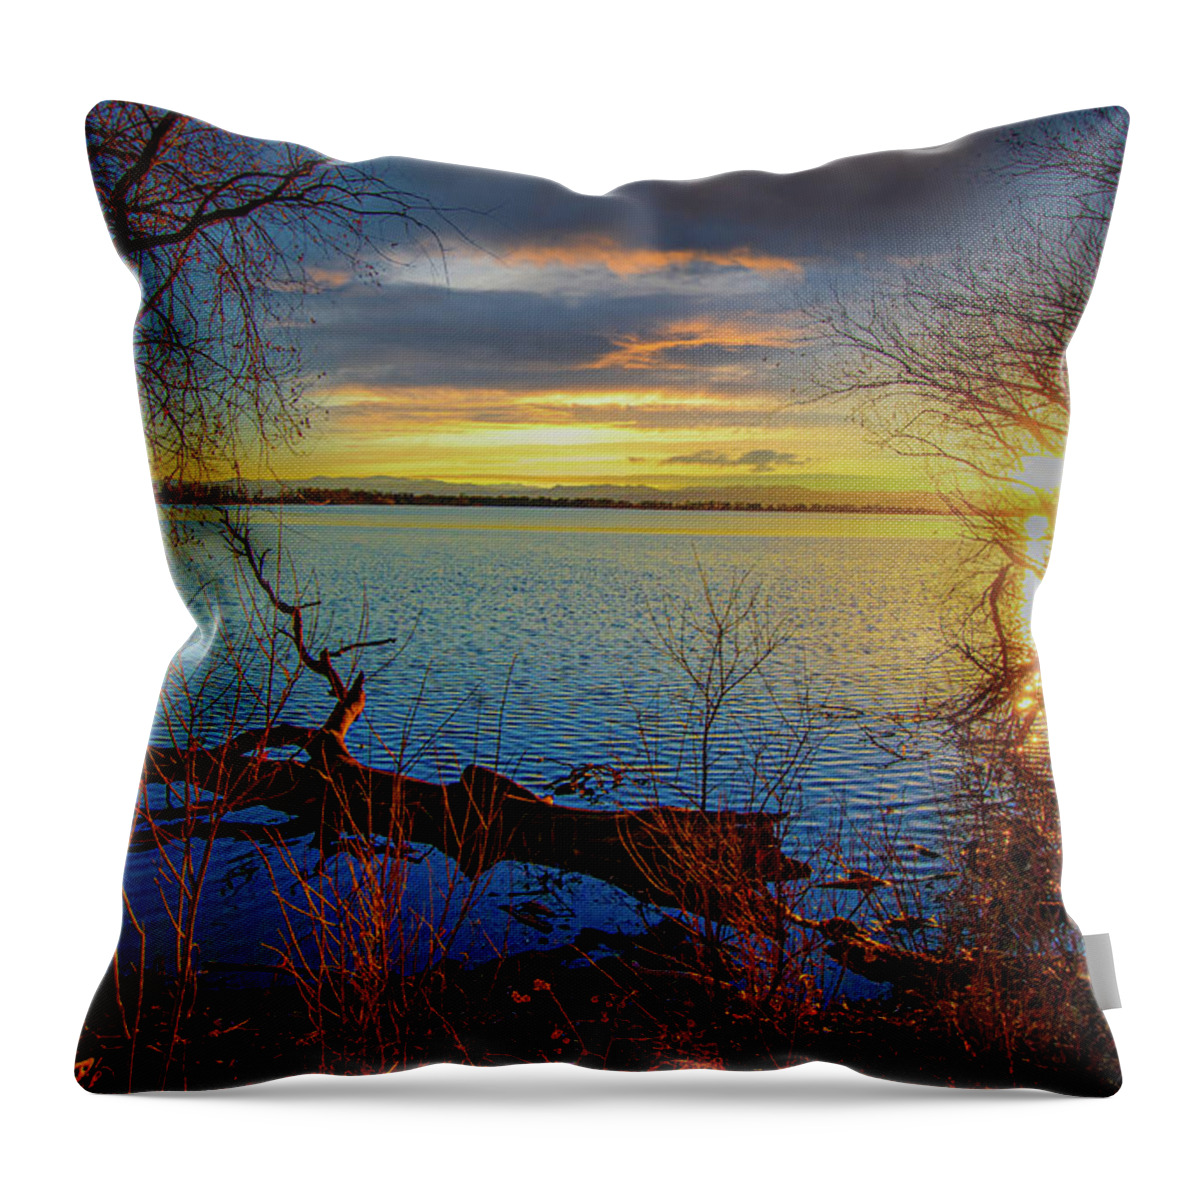 Autumn Throw Pillow featuring the photograph Sunset Over Lake Framed By TreesSunset Over Lake Framed By Trees by Tom Potter